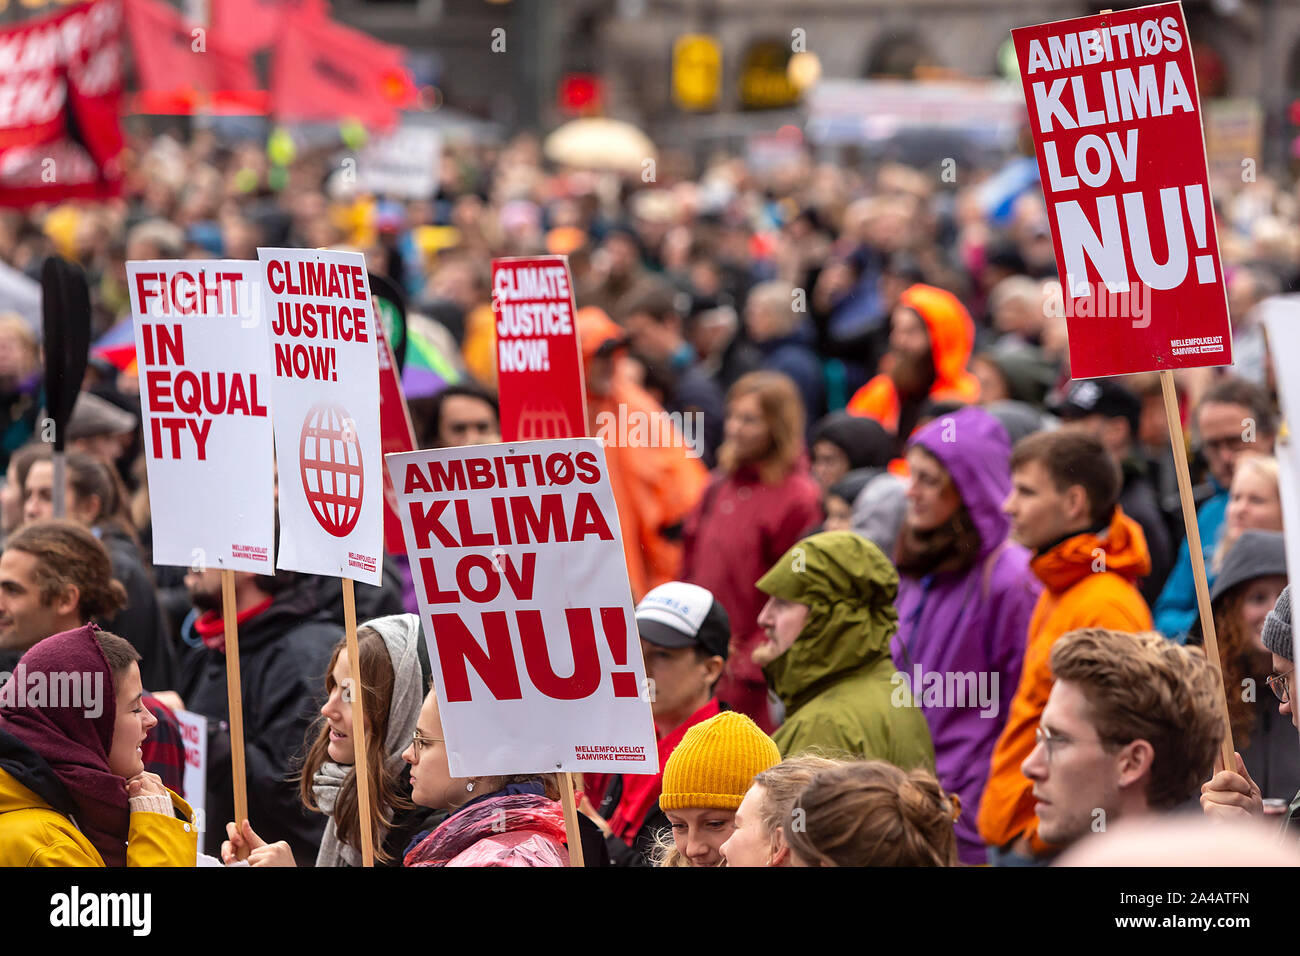 COPENHAGEN, DENMARK – OCTOBER 11, 2019:  Thousands of people gather at a People’s Climate March at Copenhagen City Hall Square and demanded swift and extensive climate action, which marks the conclusion of the C40 World Mayors Summit during this week in Copenhagen.  To the right a sign with the text in English: ‘Ambitious climate law now’. This refers to a popular demand for a statutory framework condition for the Danish Governments climate efforts, which includes obligations to define binding climate goals. Stock Photo